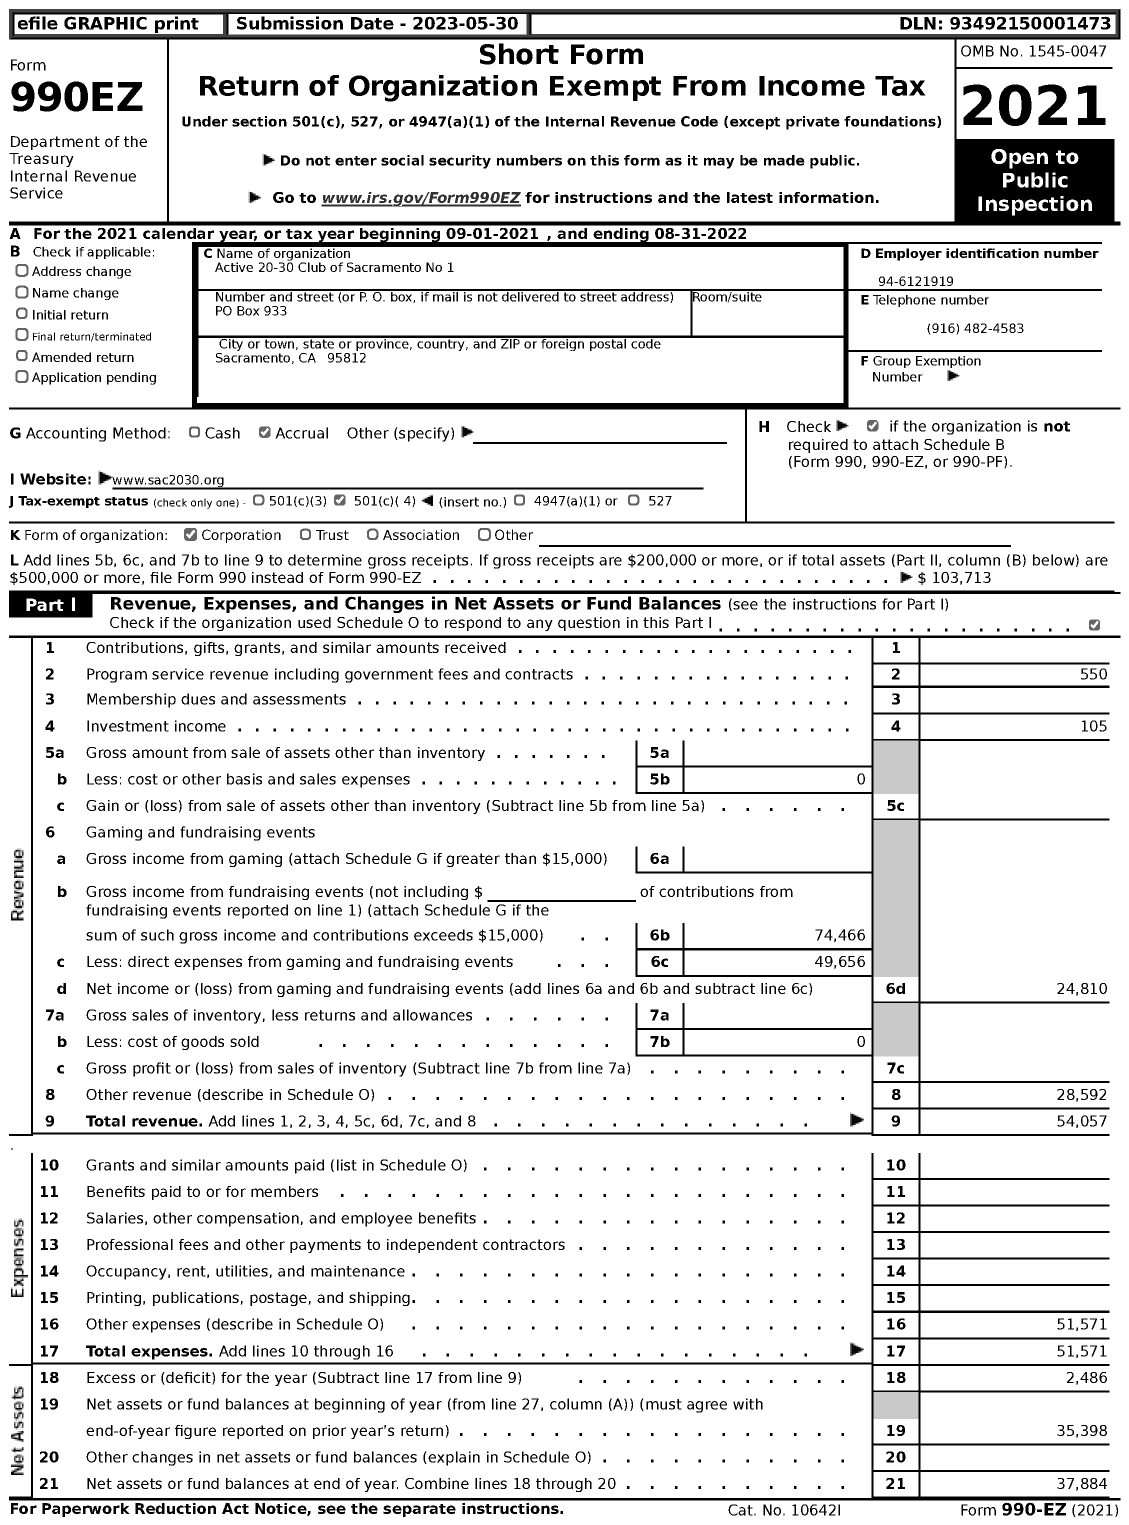 Image of first page of 2021 Form 990EZ for Active 20-30 Club of Sacramento No 1